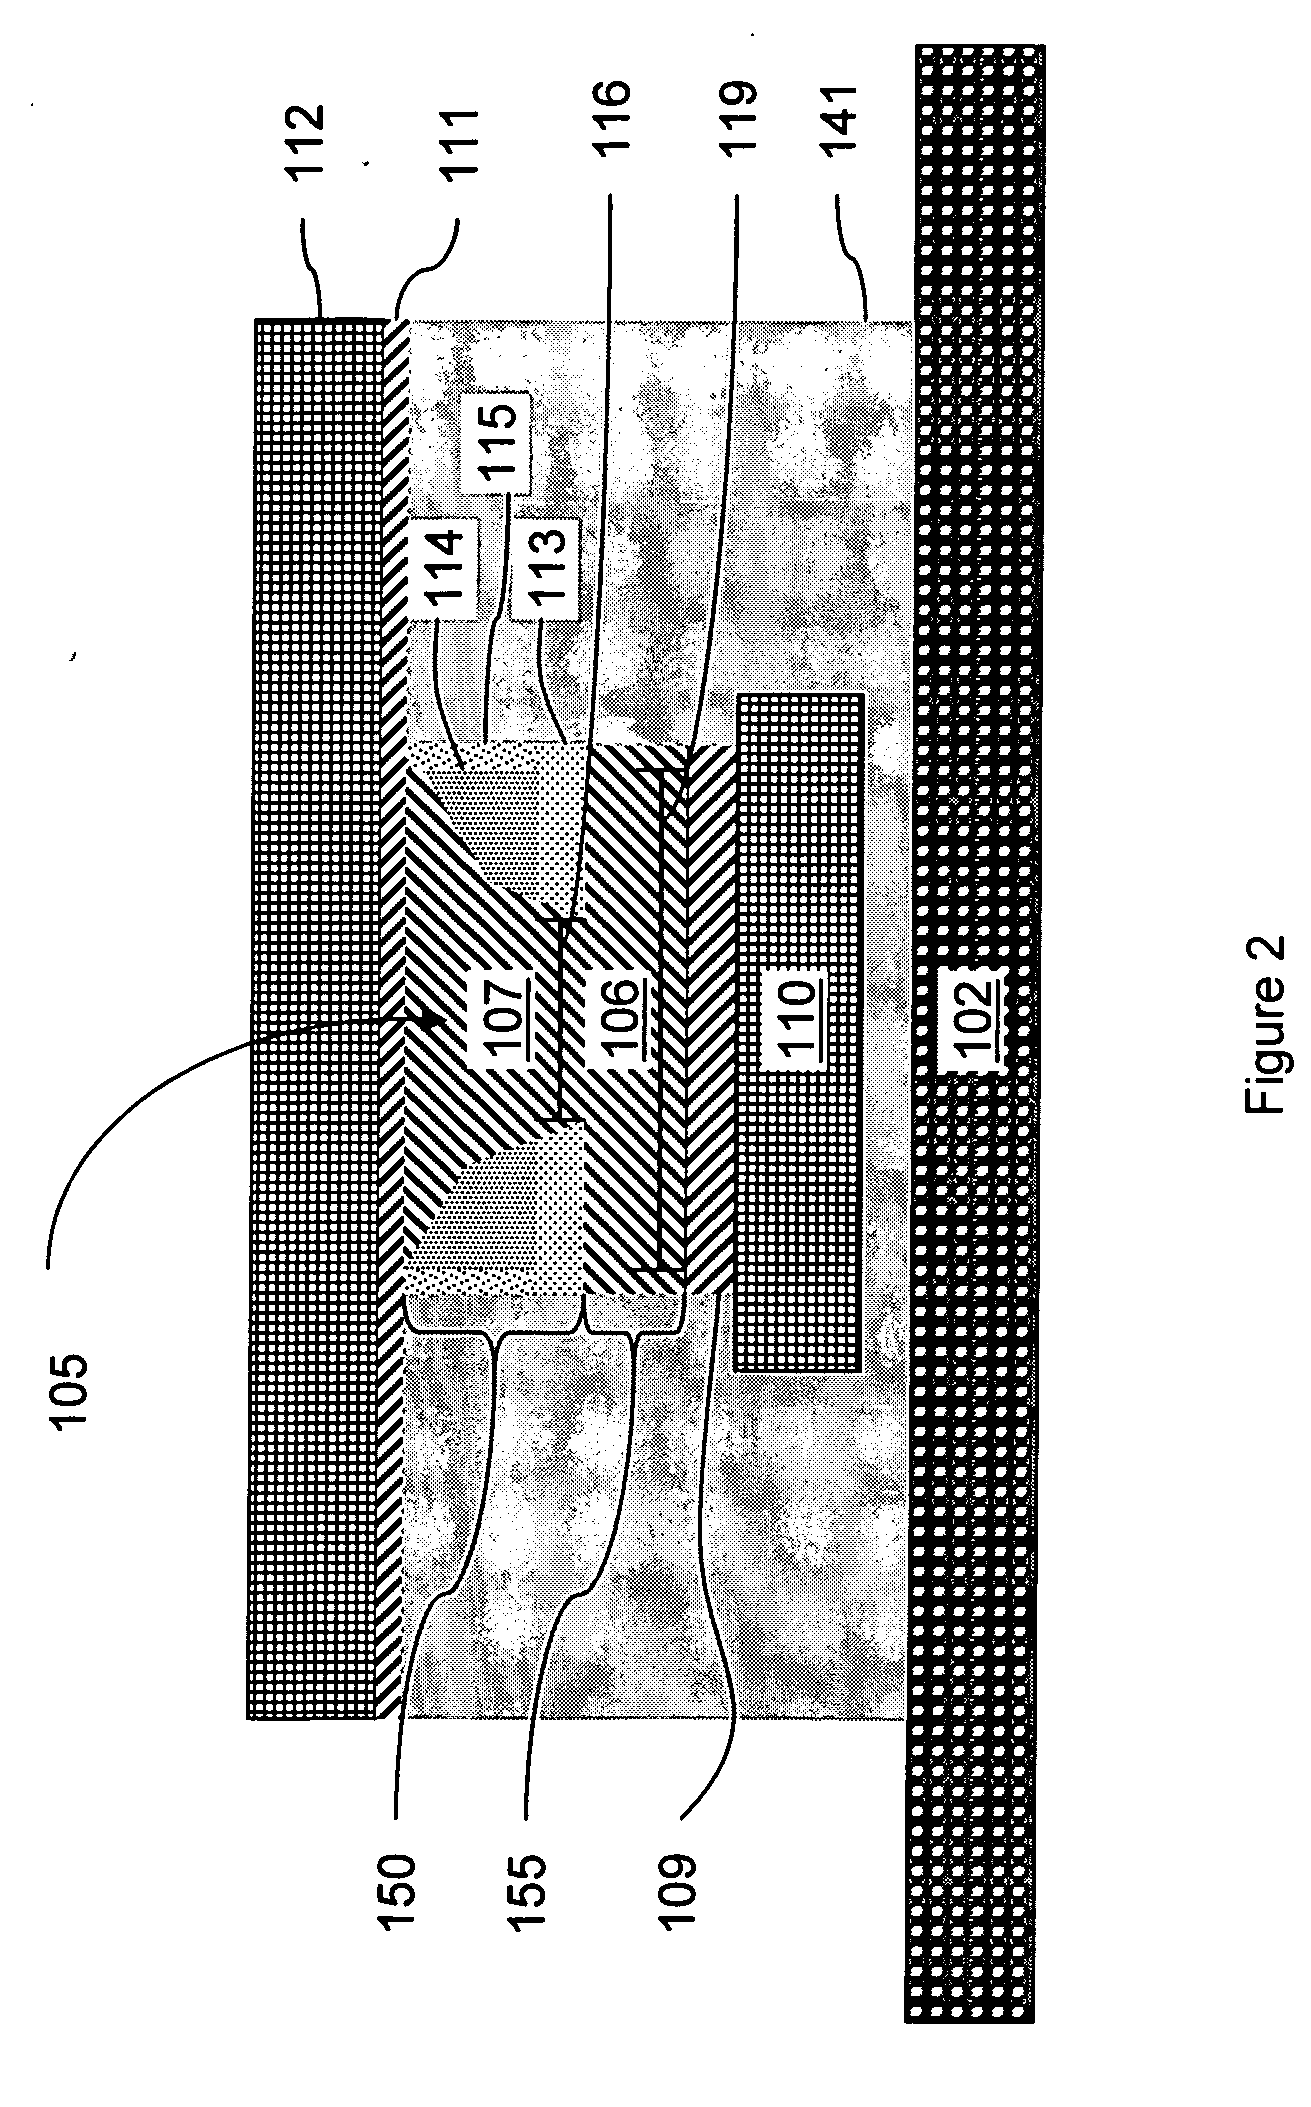 Structure for confining the switching current in phase memory (PCM) cells